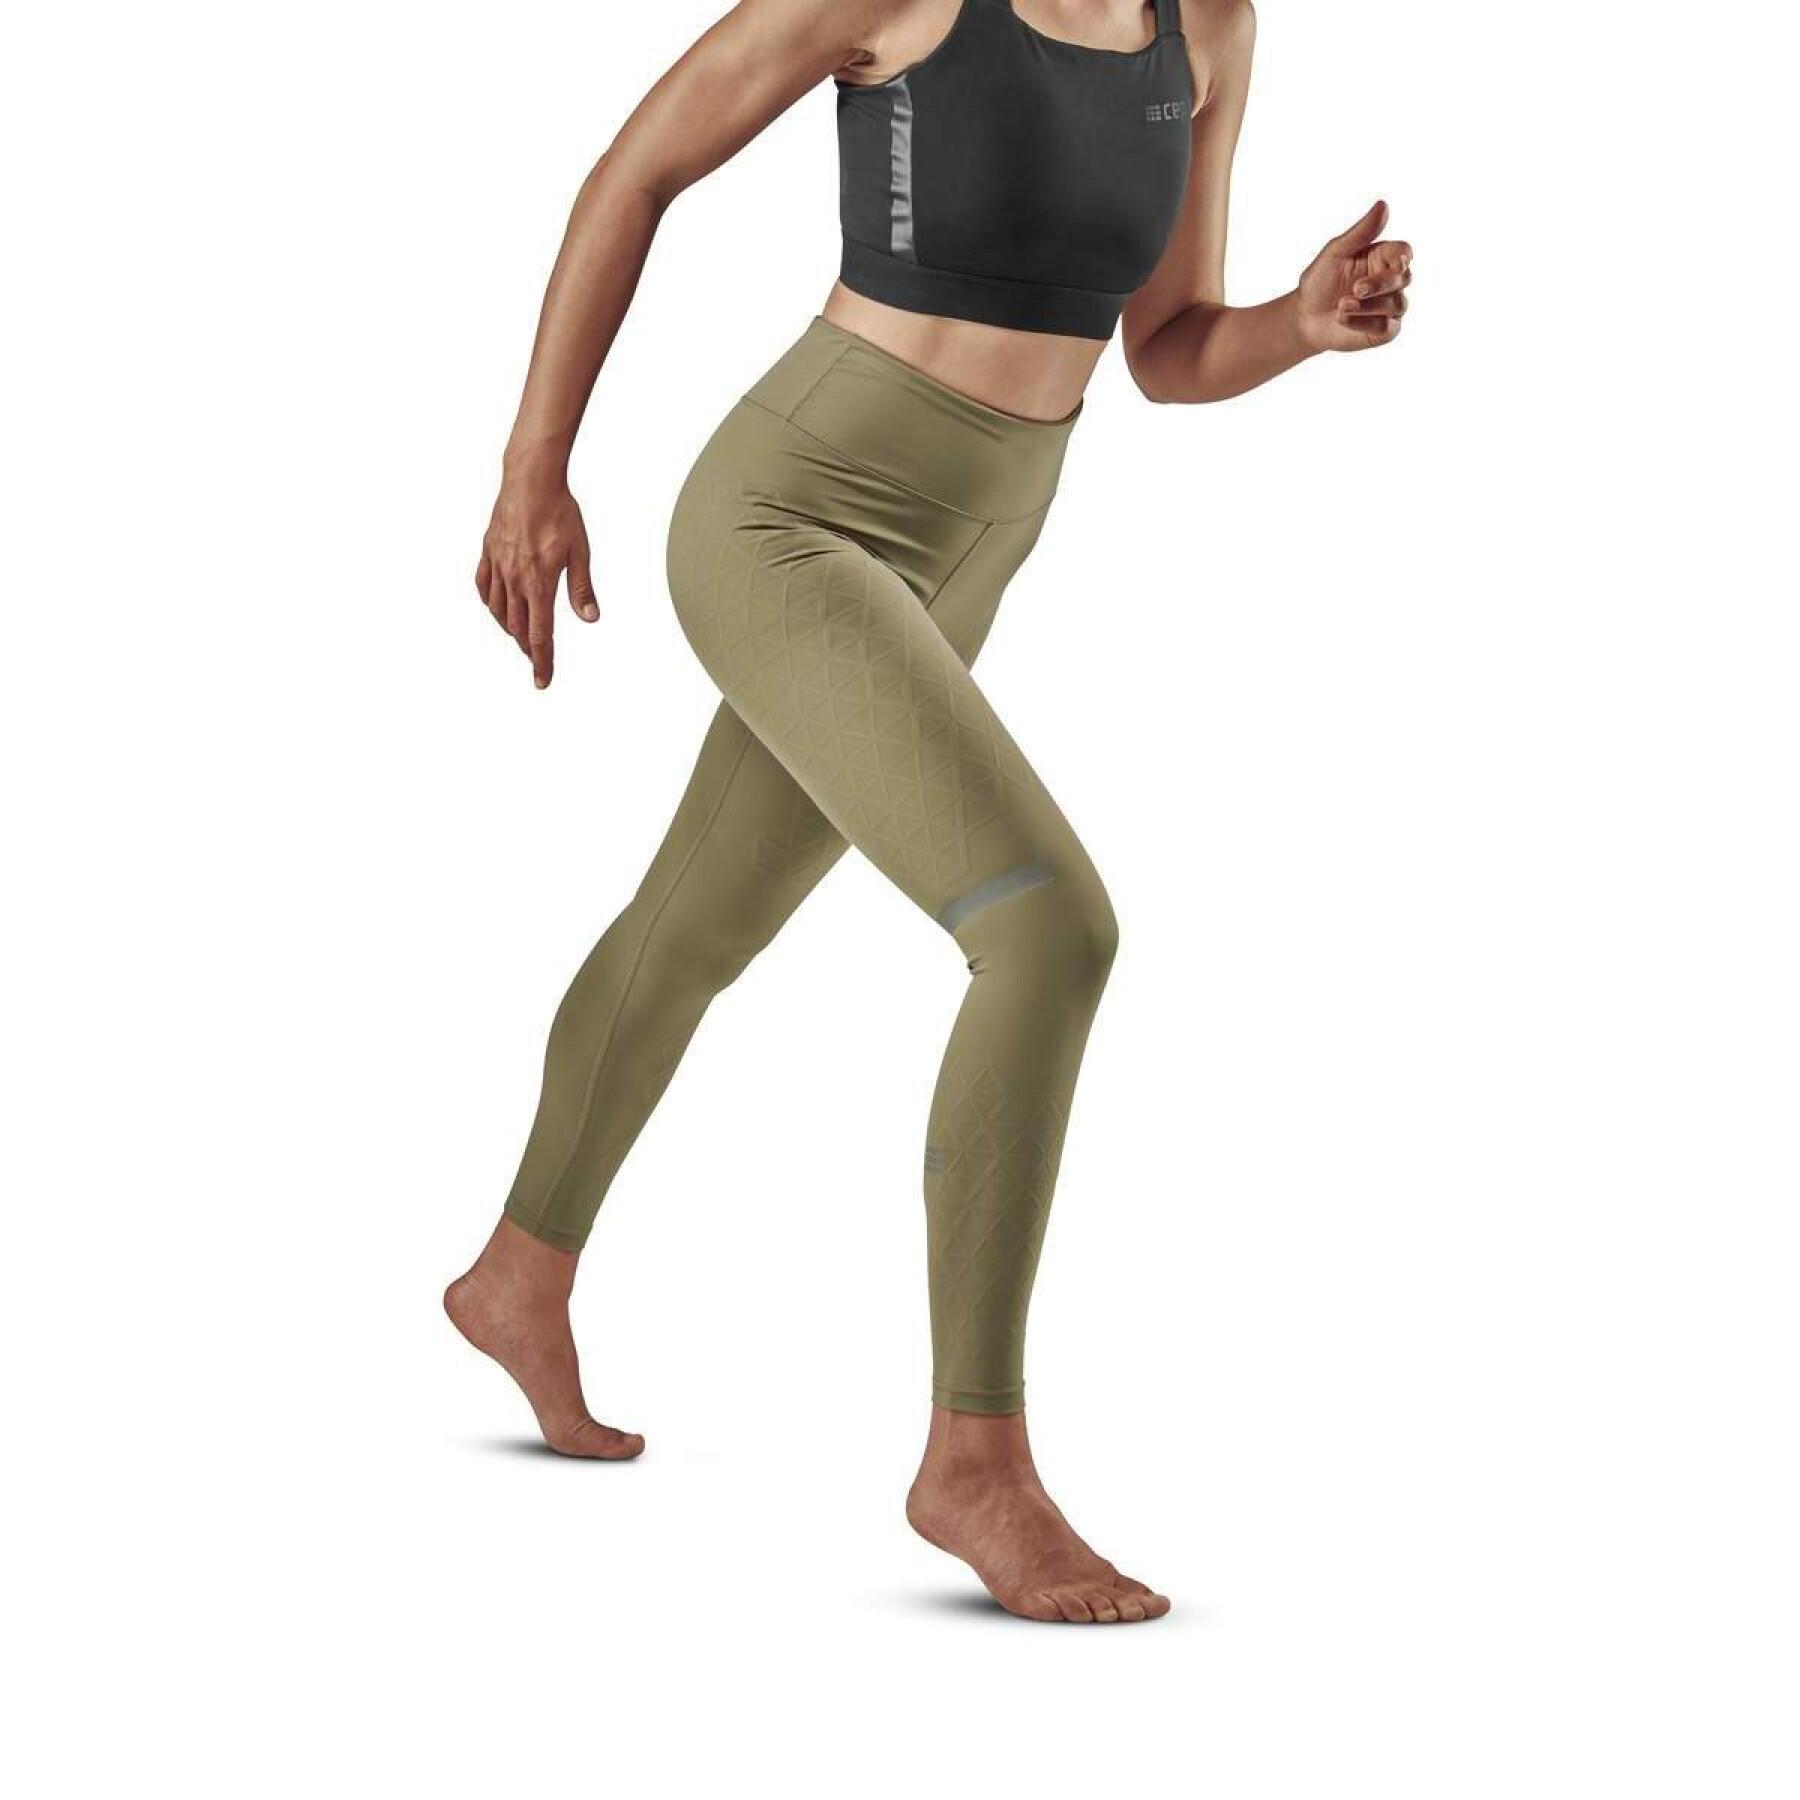 Women's leggings CEP Compression - Tights and Pants - Women - Clothes